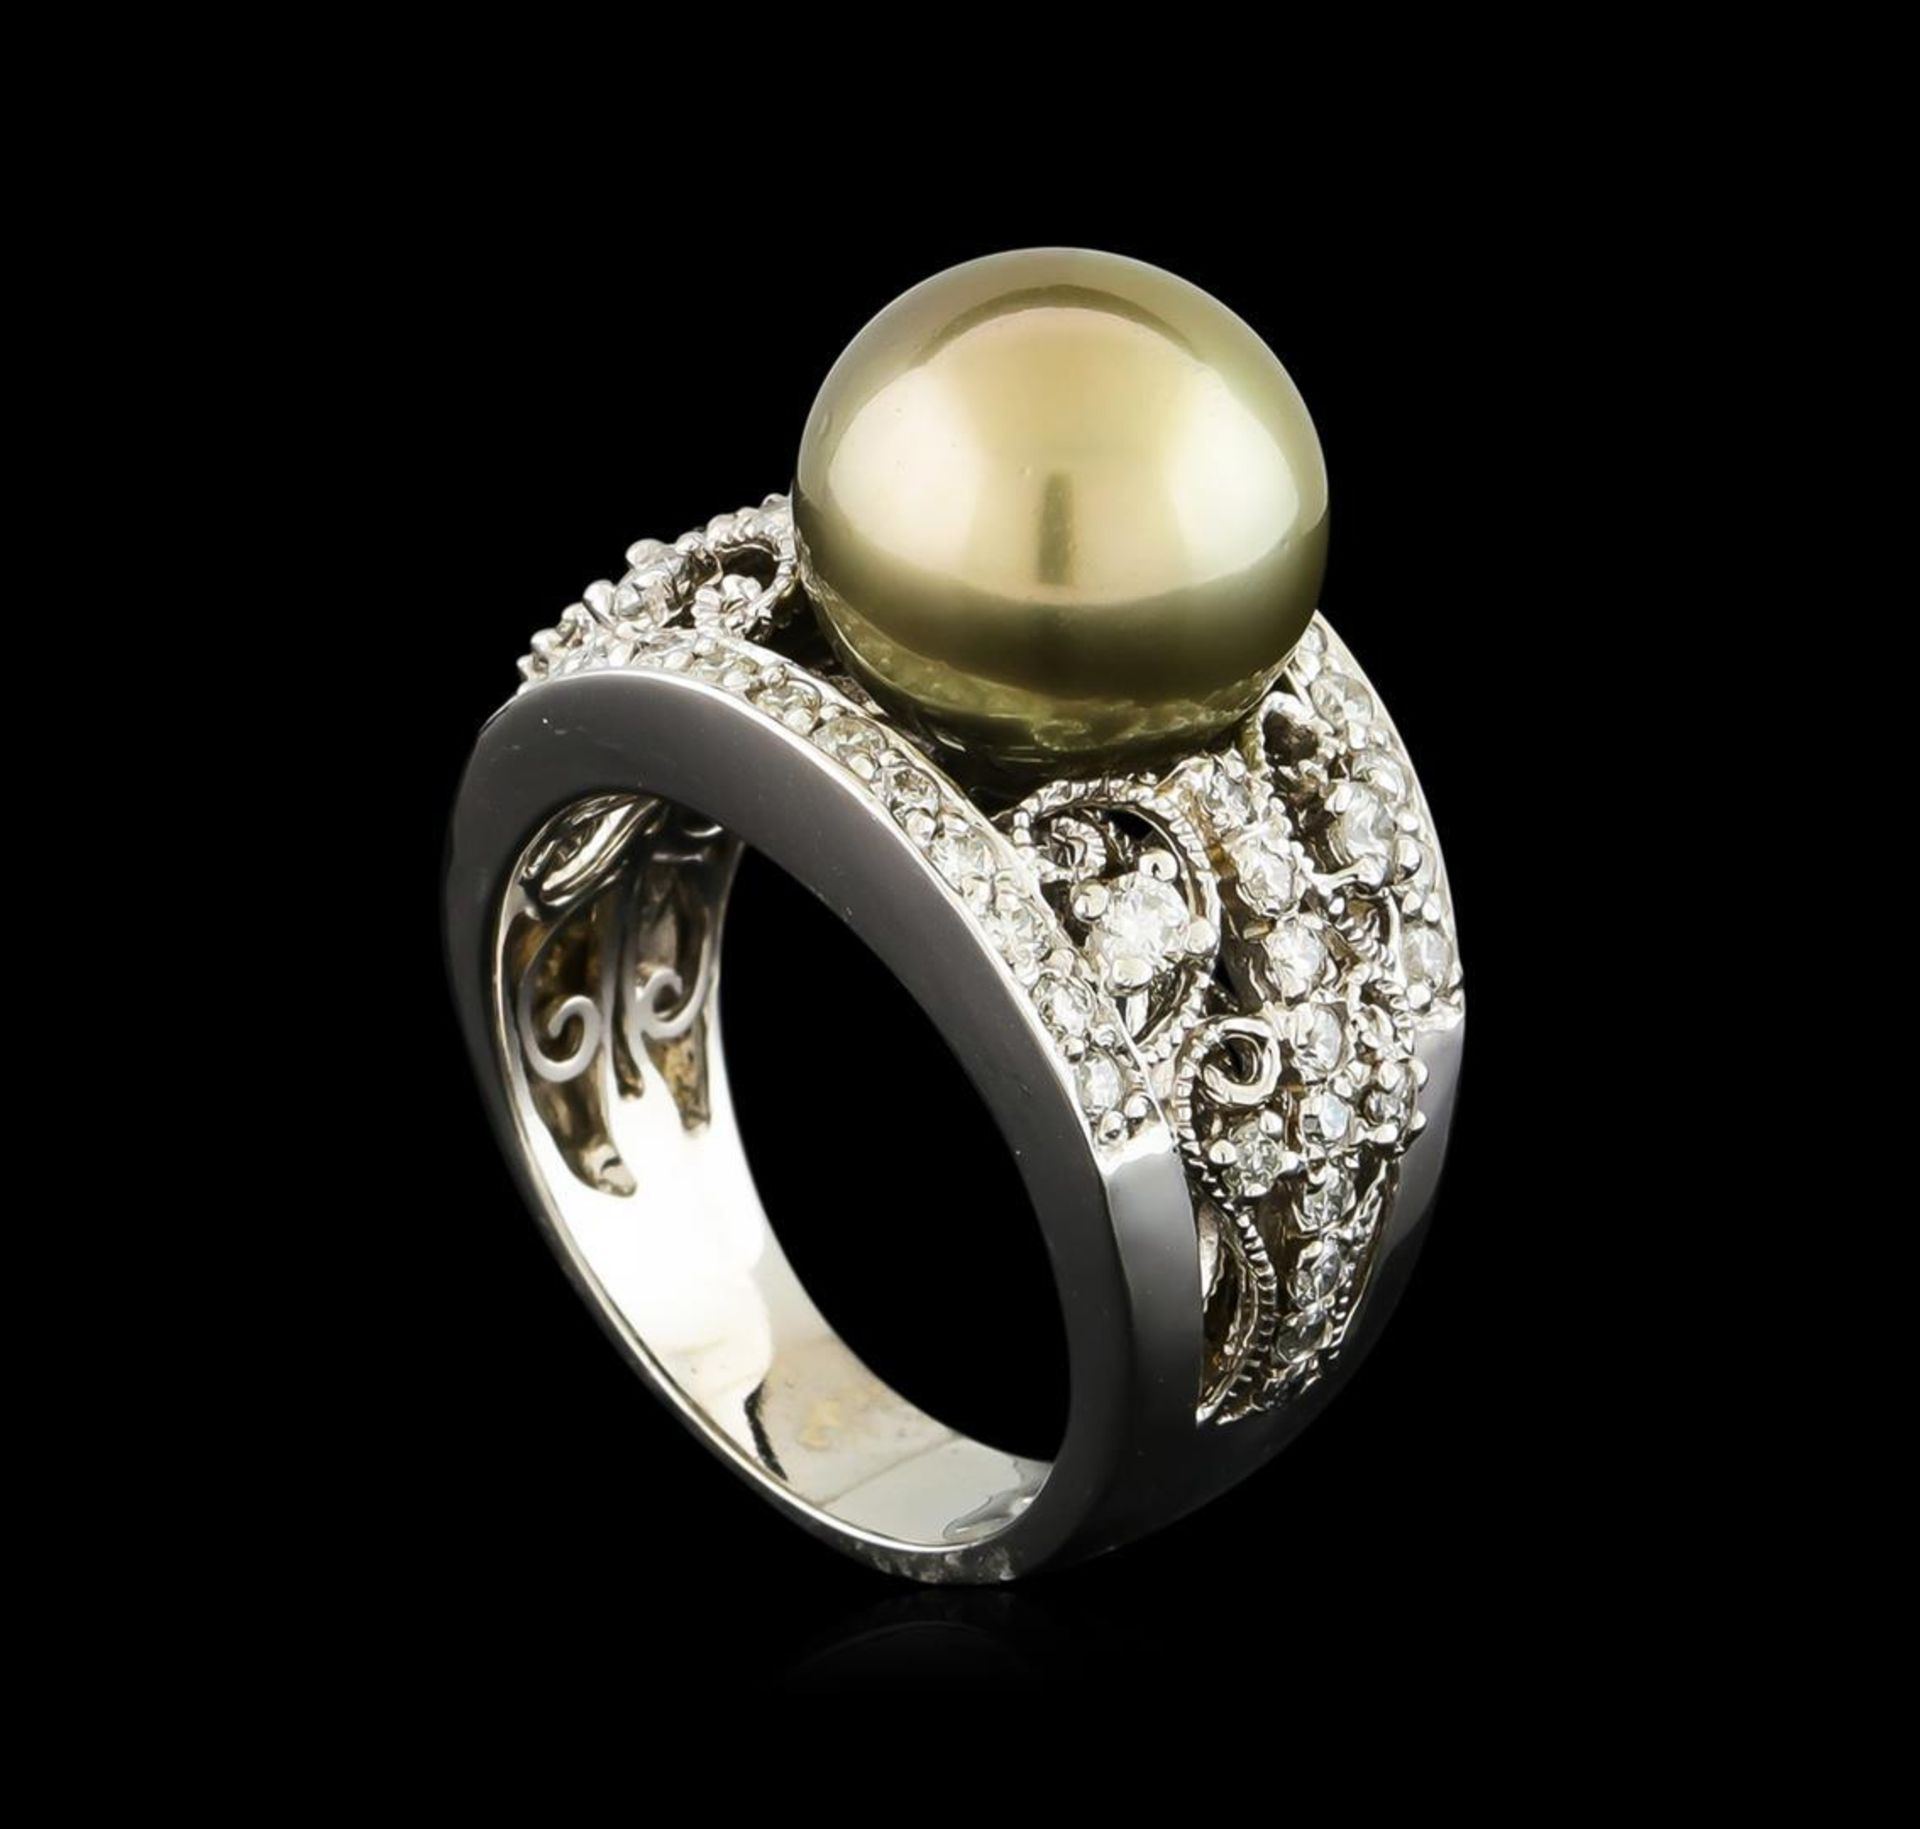 Tahitian Pearl and Diamond Ring - 14KT White Gold - Image 4 of 5